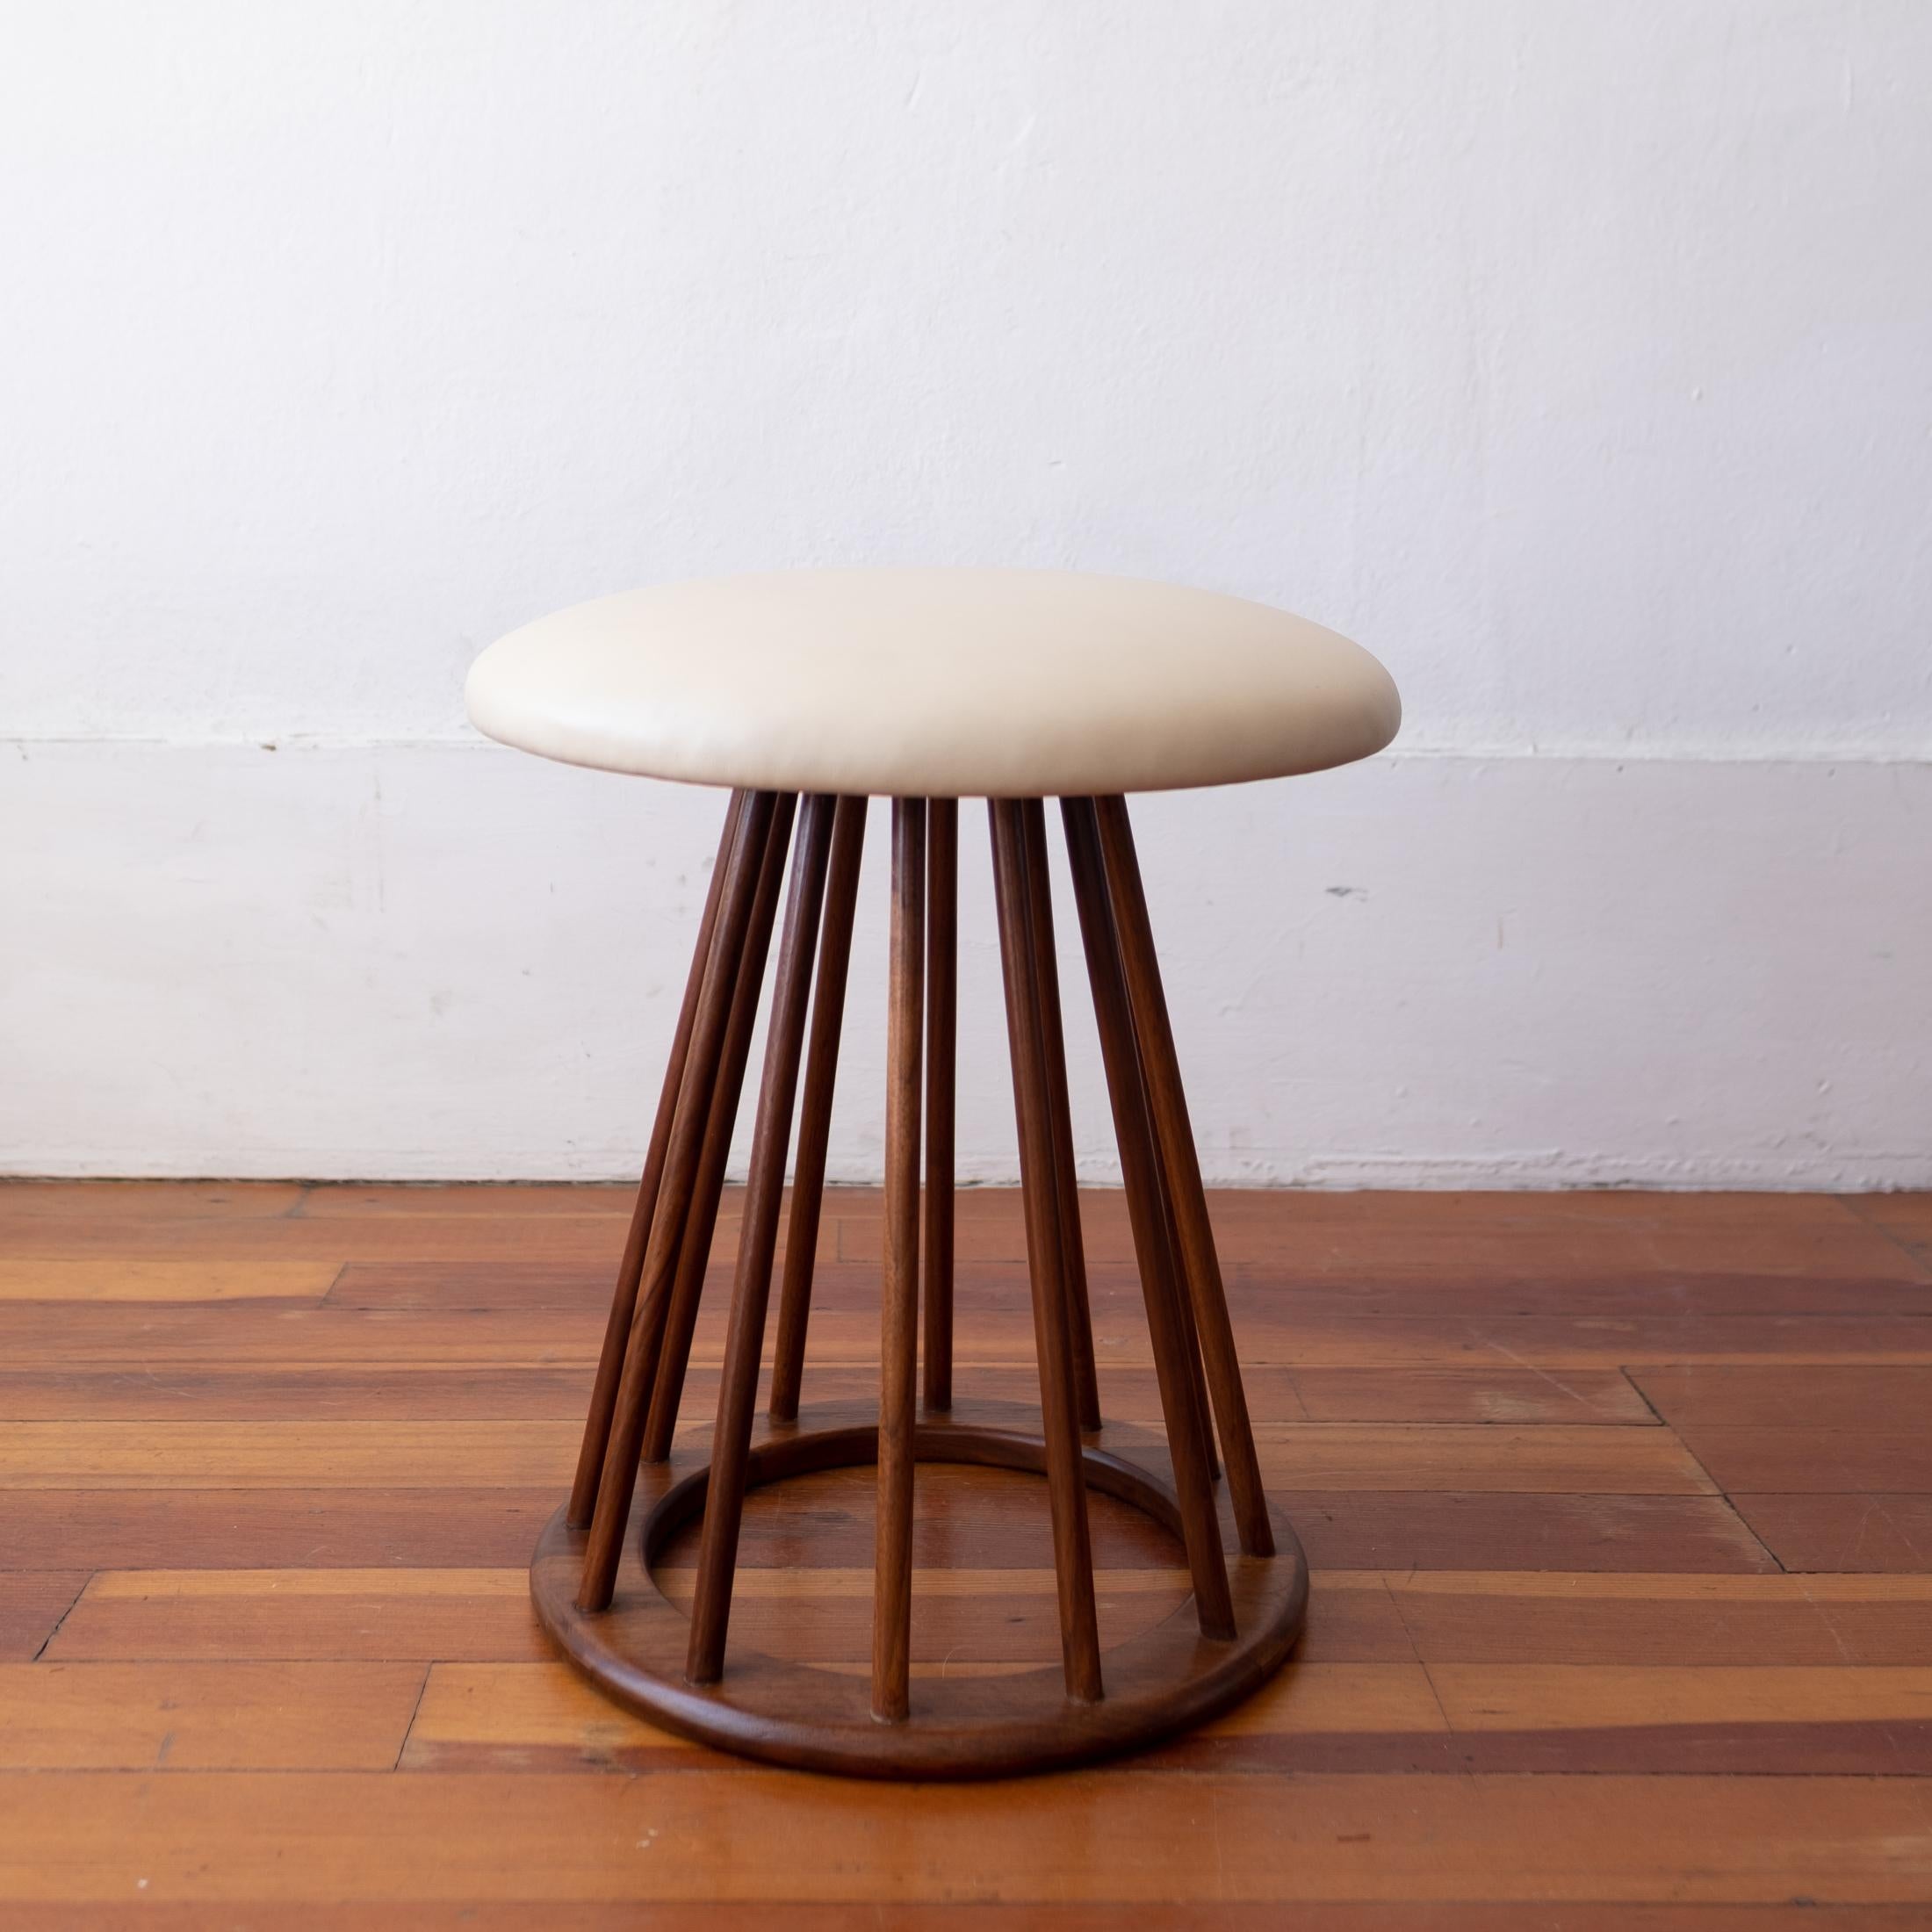 Vintage round spindle stool designed by Arthur Umanoff for Washington Woodcraft. Off white Naugahyde upholstery in excellent condition. 1960s.